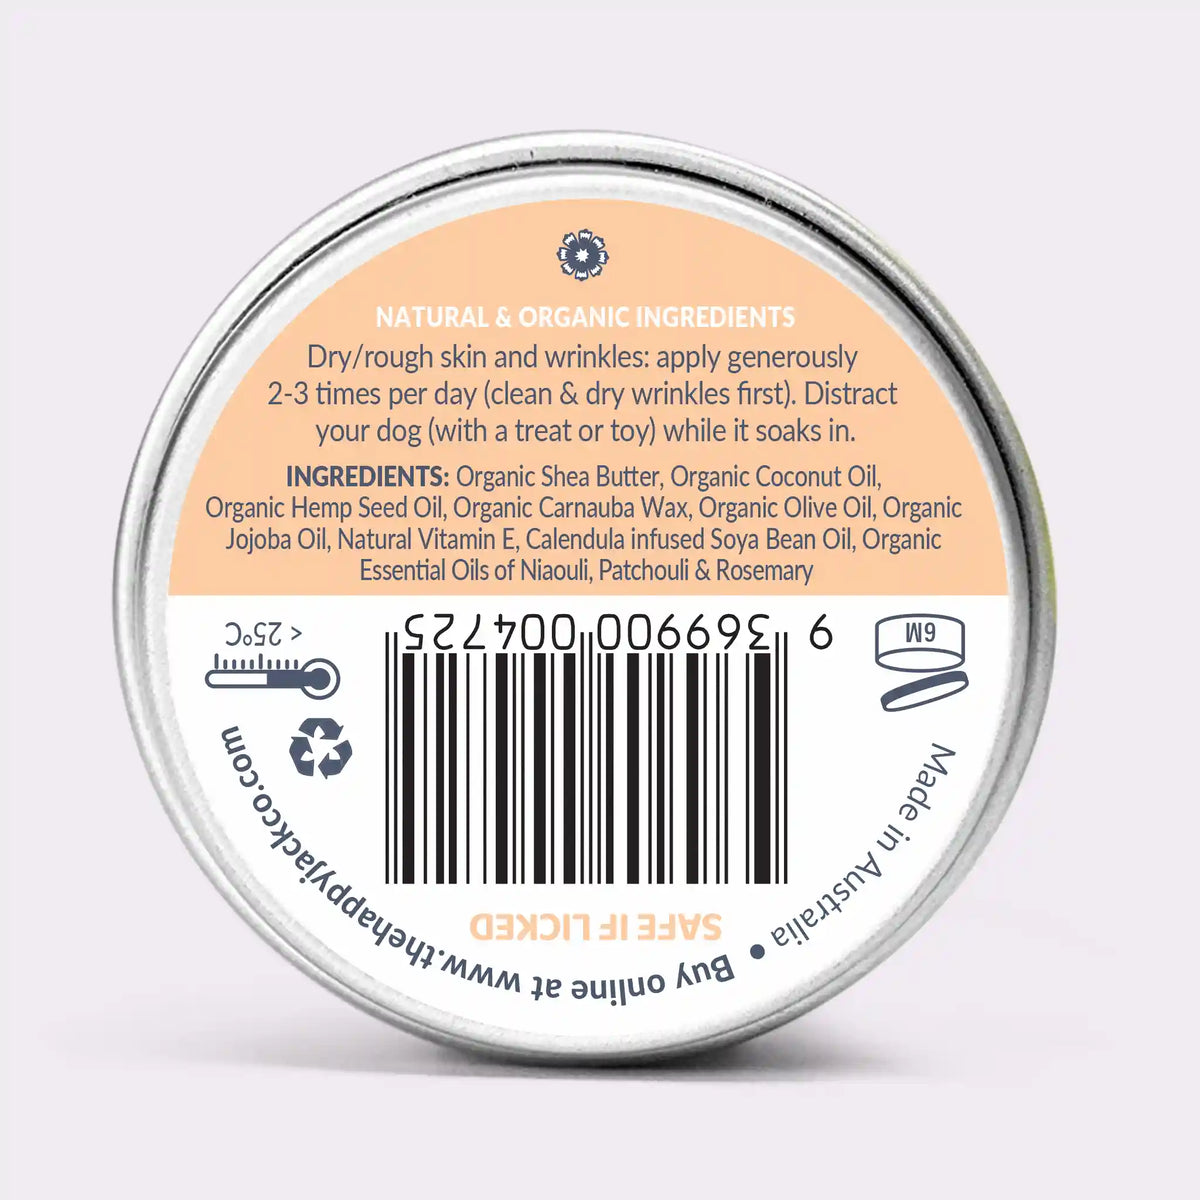 Natural dog skin balm. Itchy dog balm | The Happy Jack Co